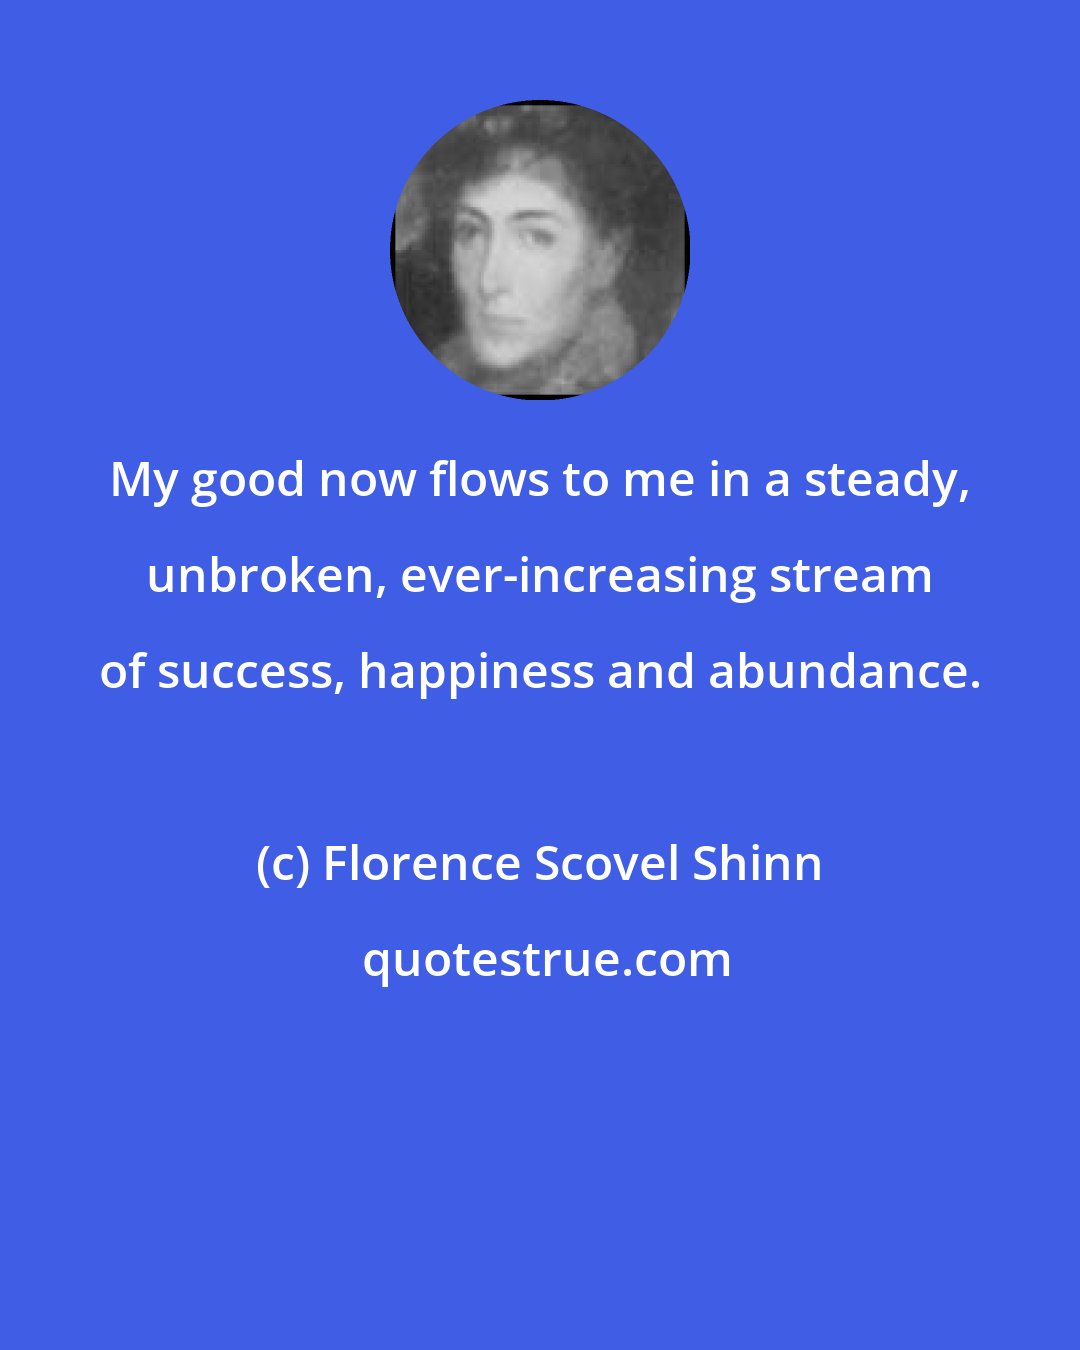 Florence Scovel Shinn: My good now flows to me in a steady, unbroken, ever-increasing stream of success, happiness and abundance.